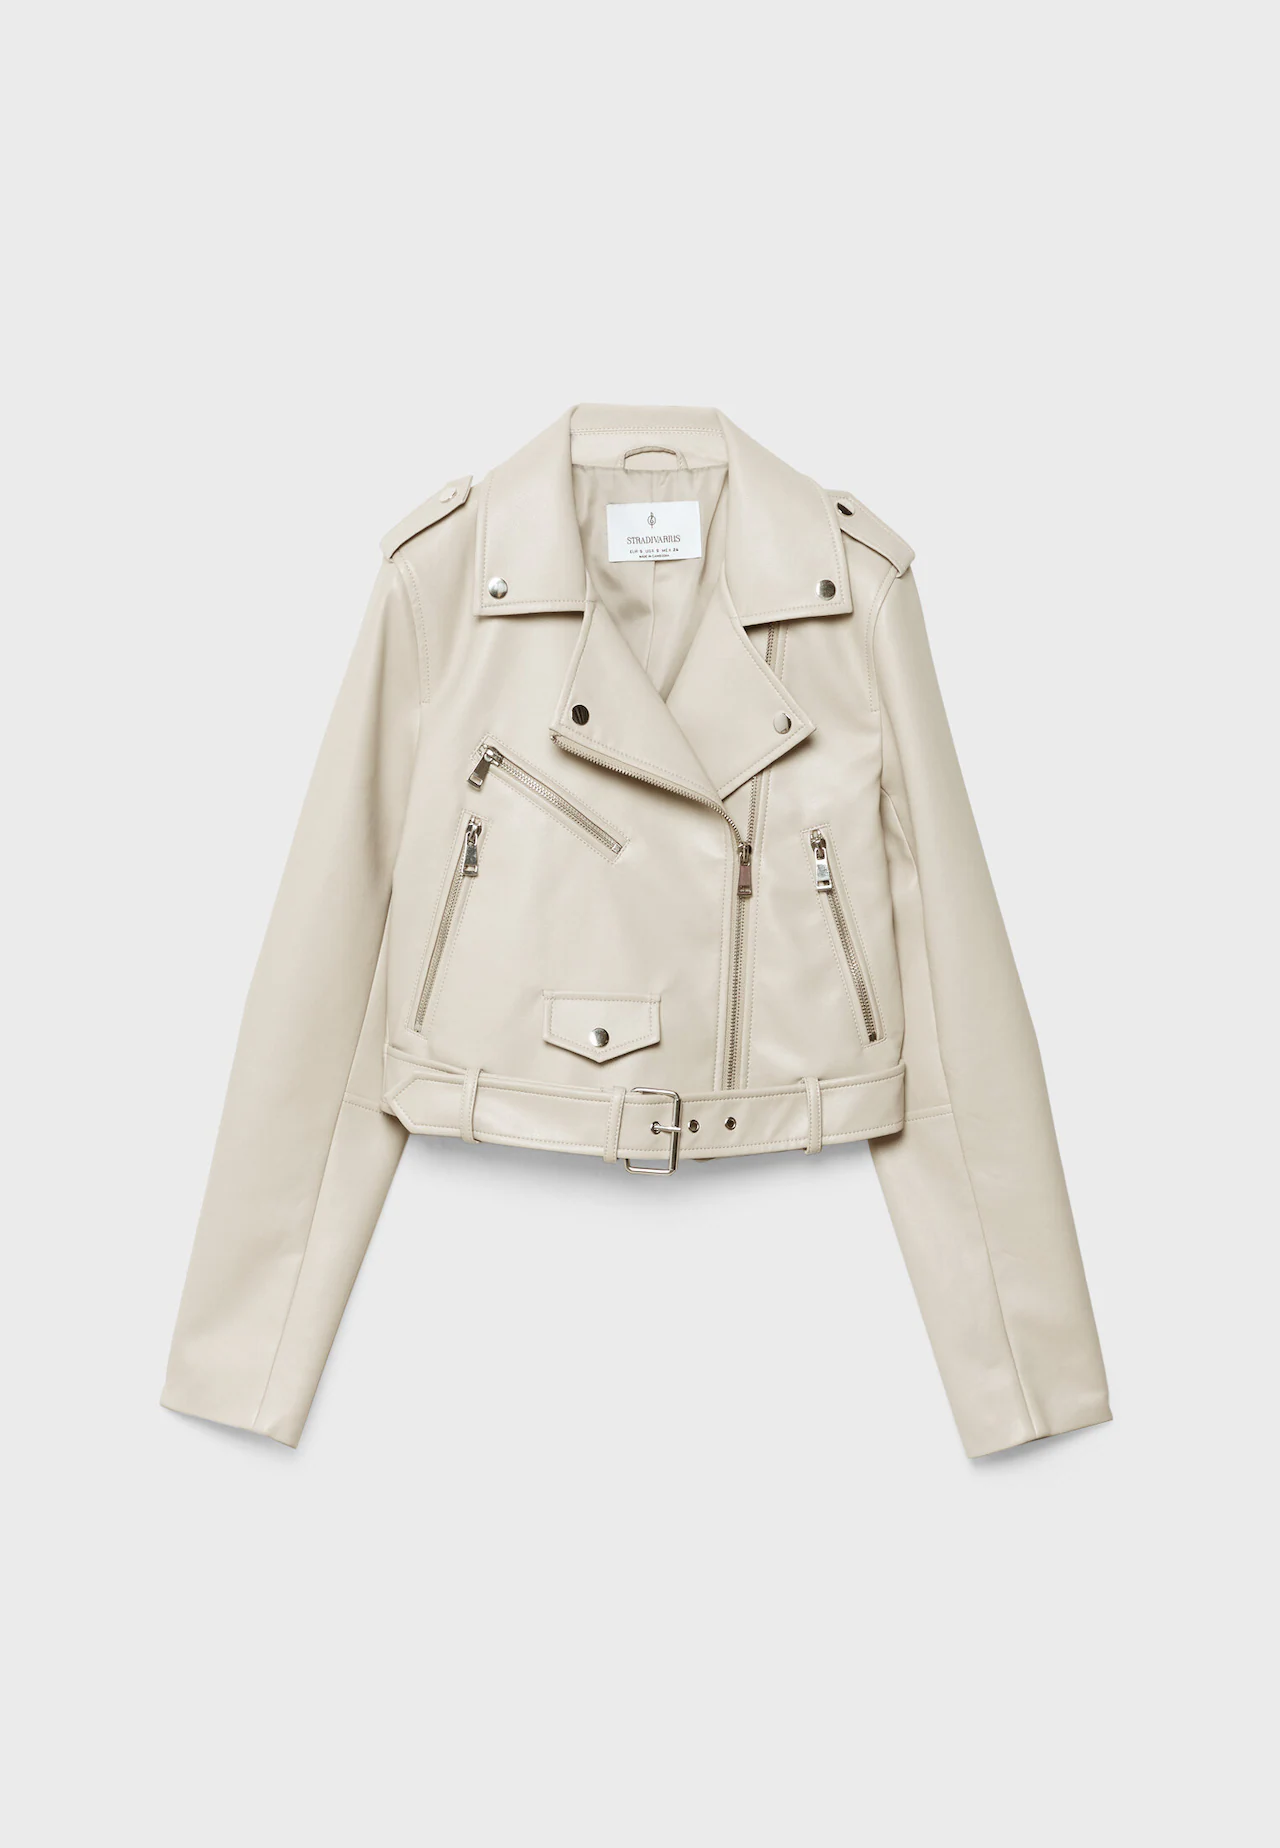 Stradivarius faux leather belted jacket in white